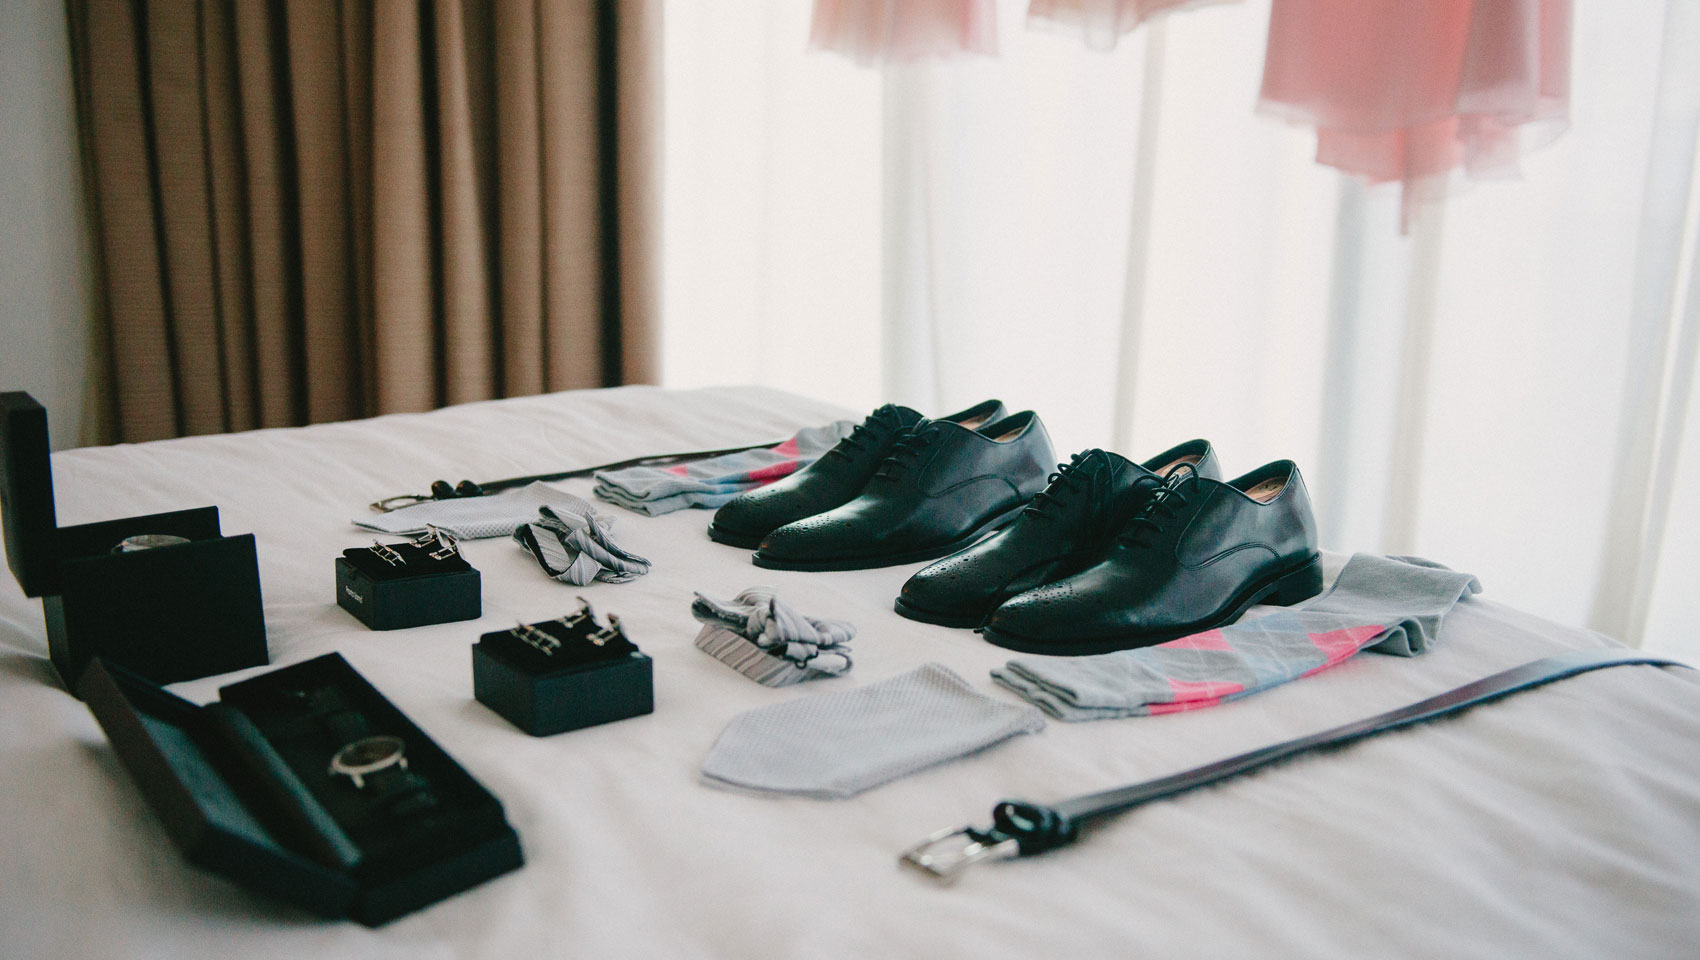 Wedding shoes, watch, tie, and belt on bed.